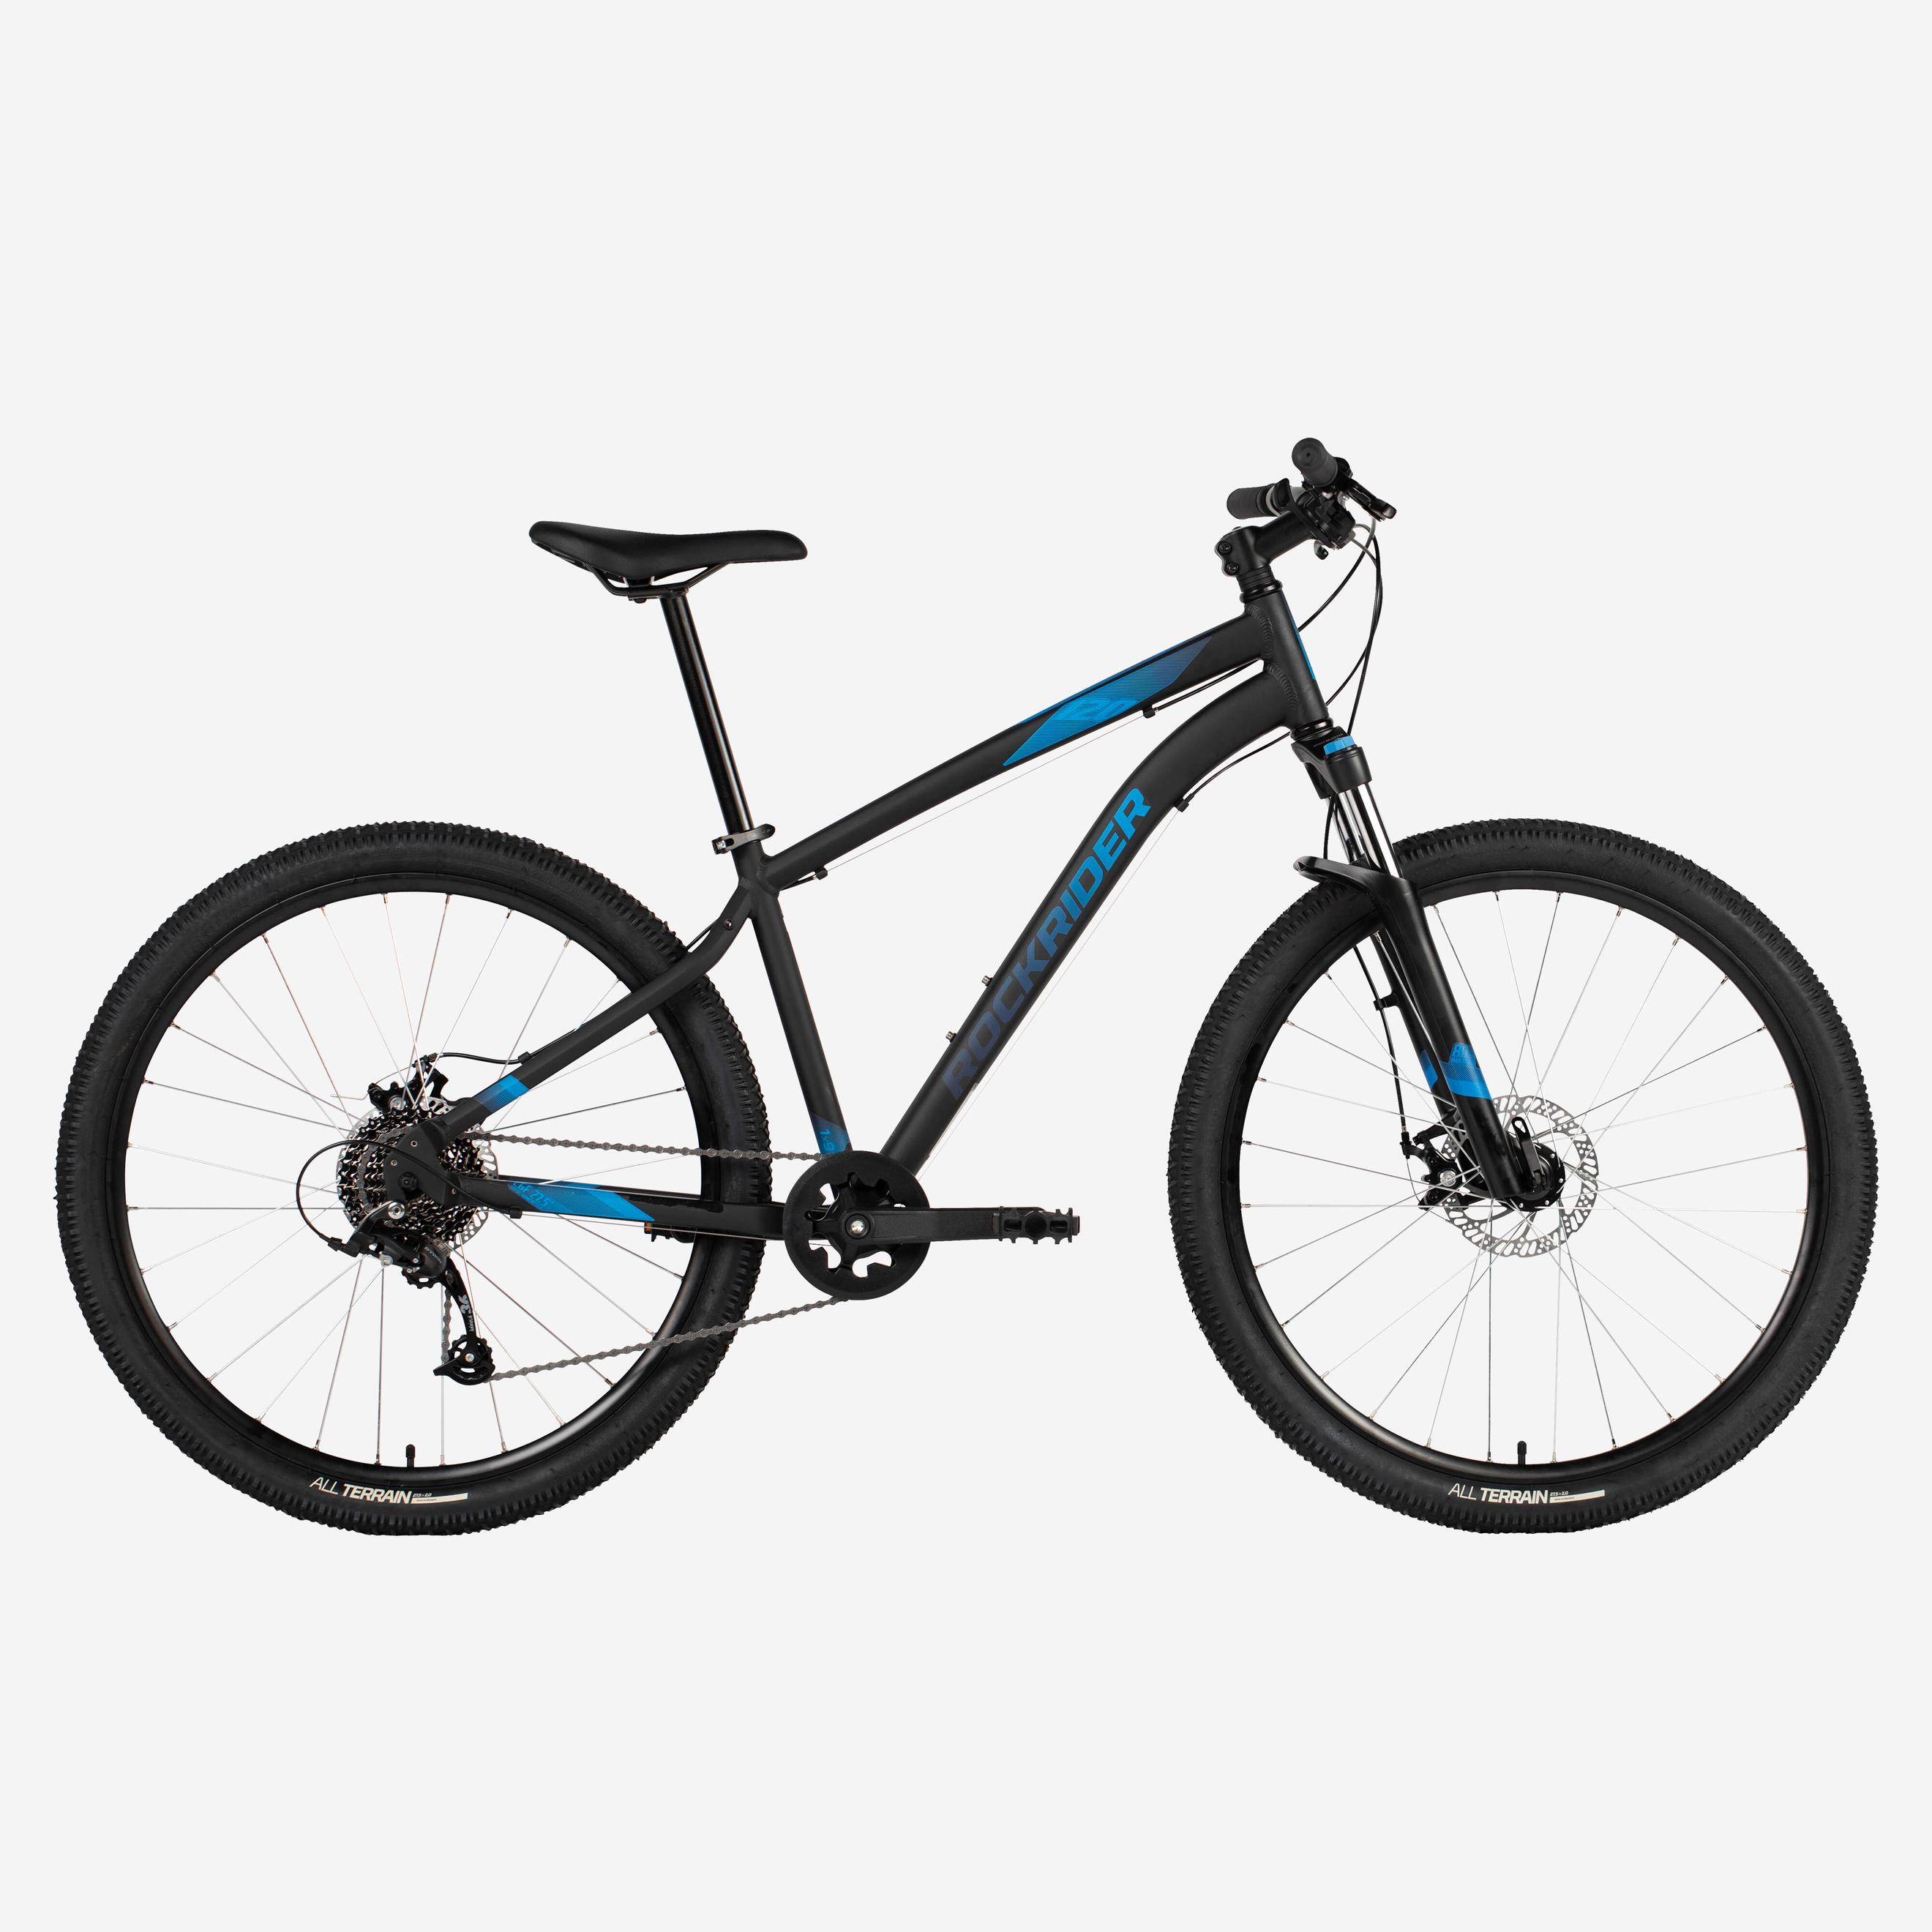 27.5” Touring Mountain Bike - ST 120 offers at $570 in Decathlon